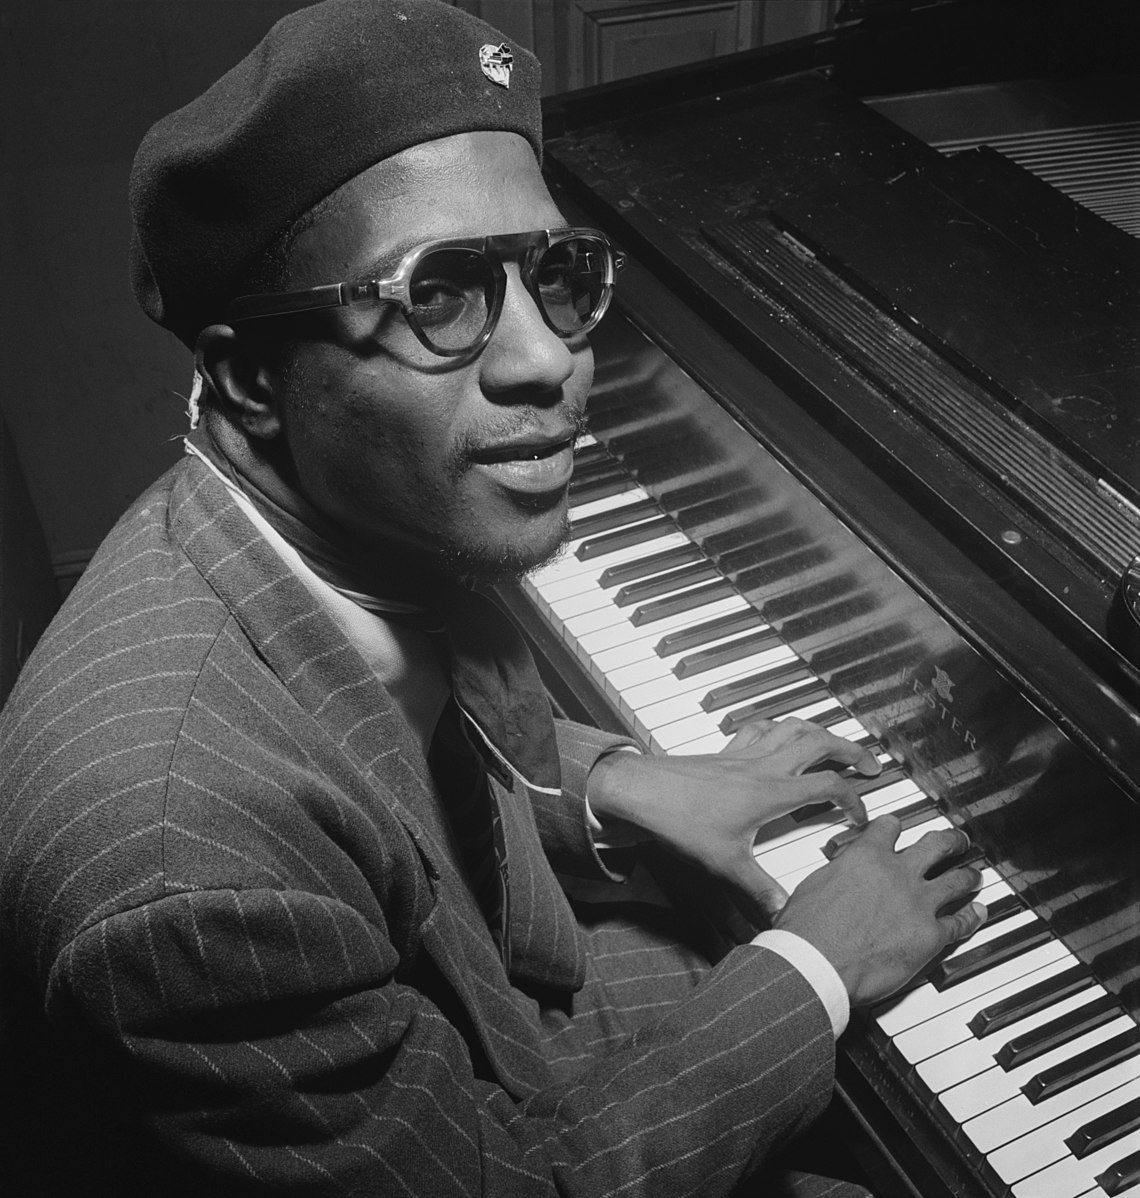 Thelonious Monk - The Complete Albums Collection (1954-1957)